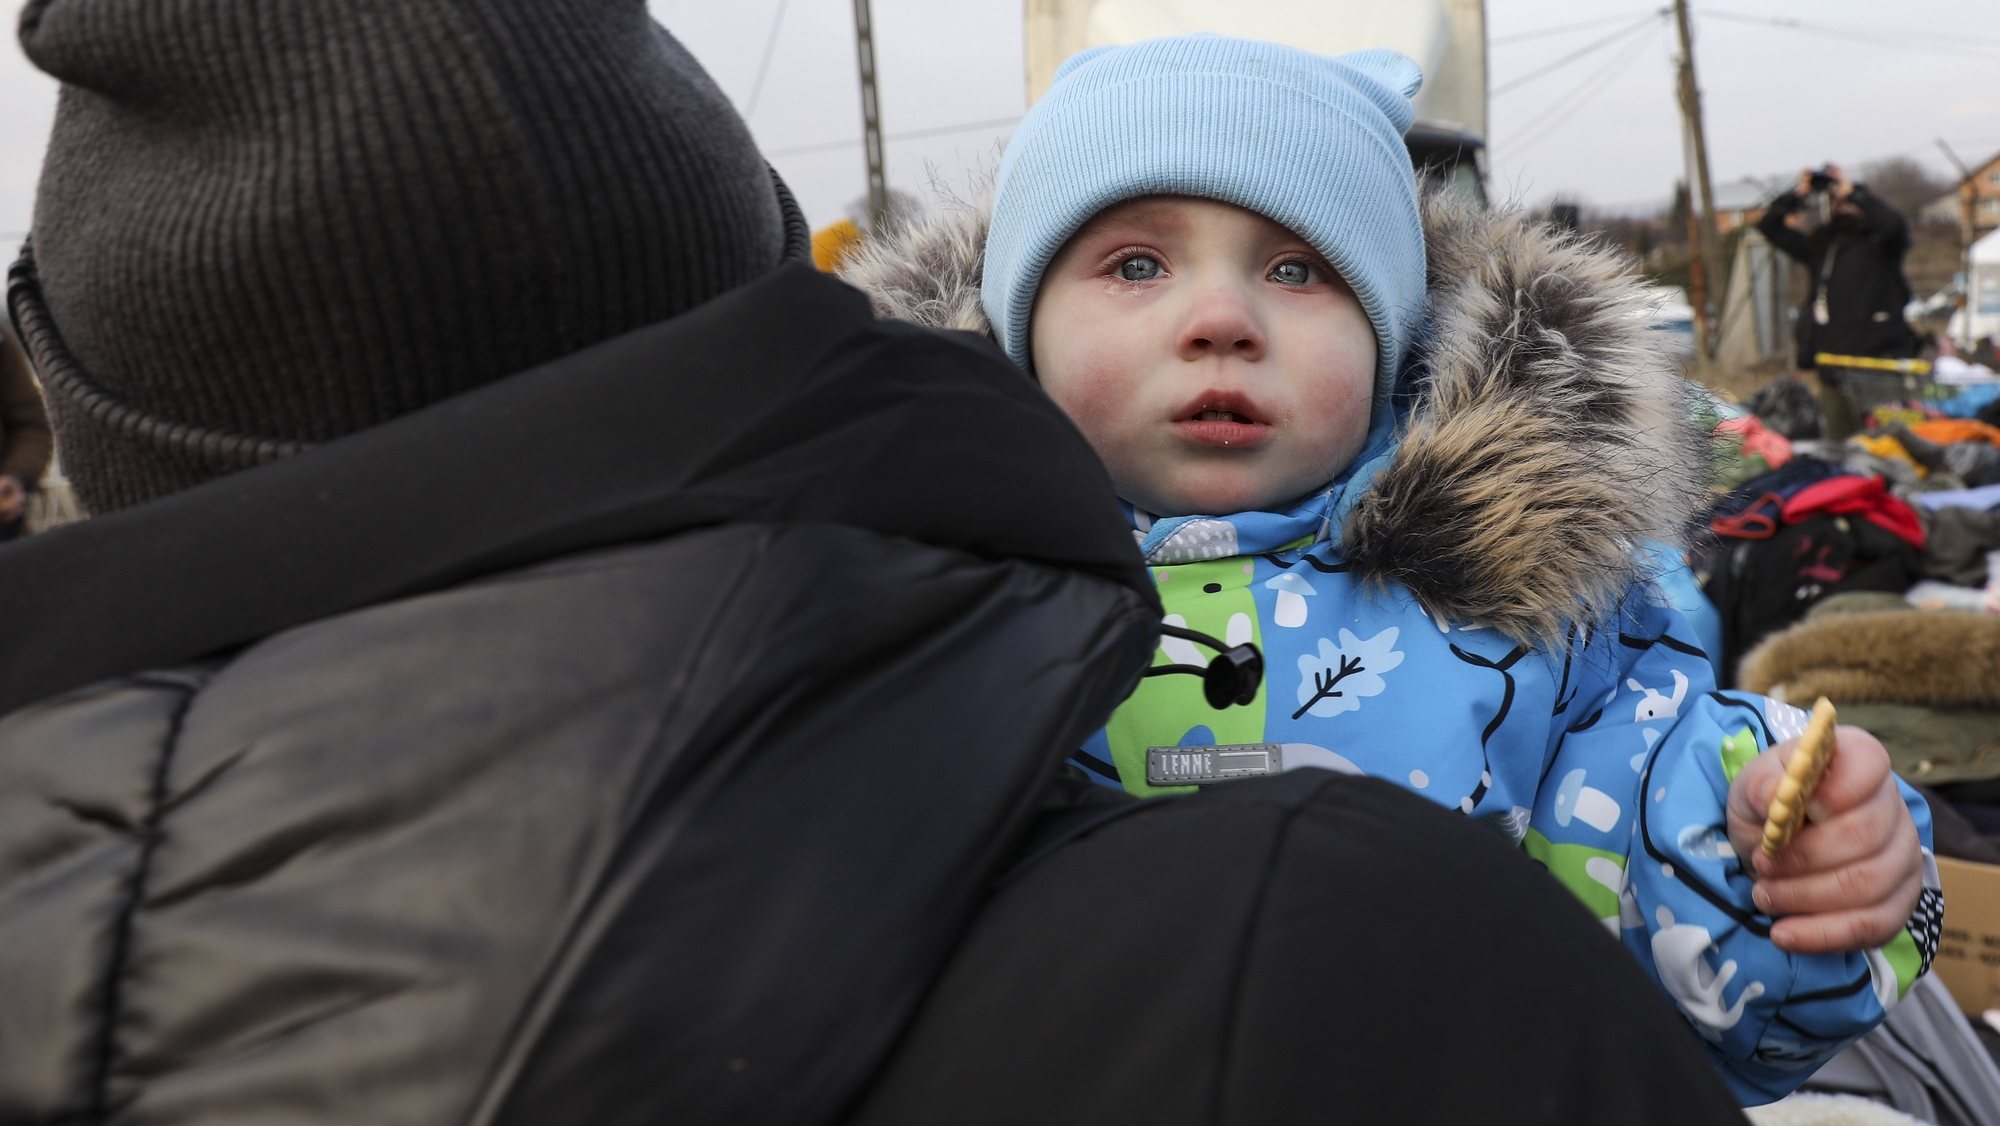 A baby cries near the Shehyni-Medyka border in Medyka, Poland, 03 March 2022. Hundreds of thousands of people have fled from Ukraine into neighboring countries since Russia began its military operation on 24 February MIGUEL A. LOPES/LUSA